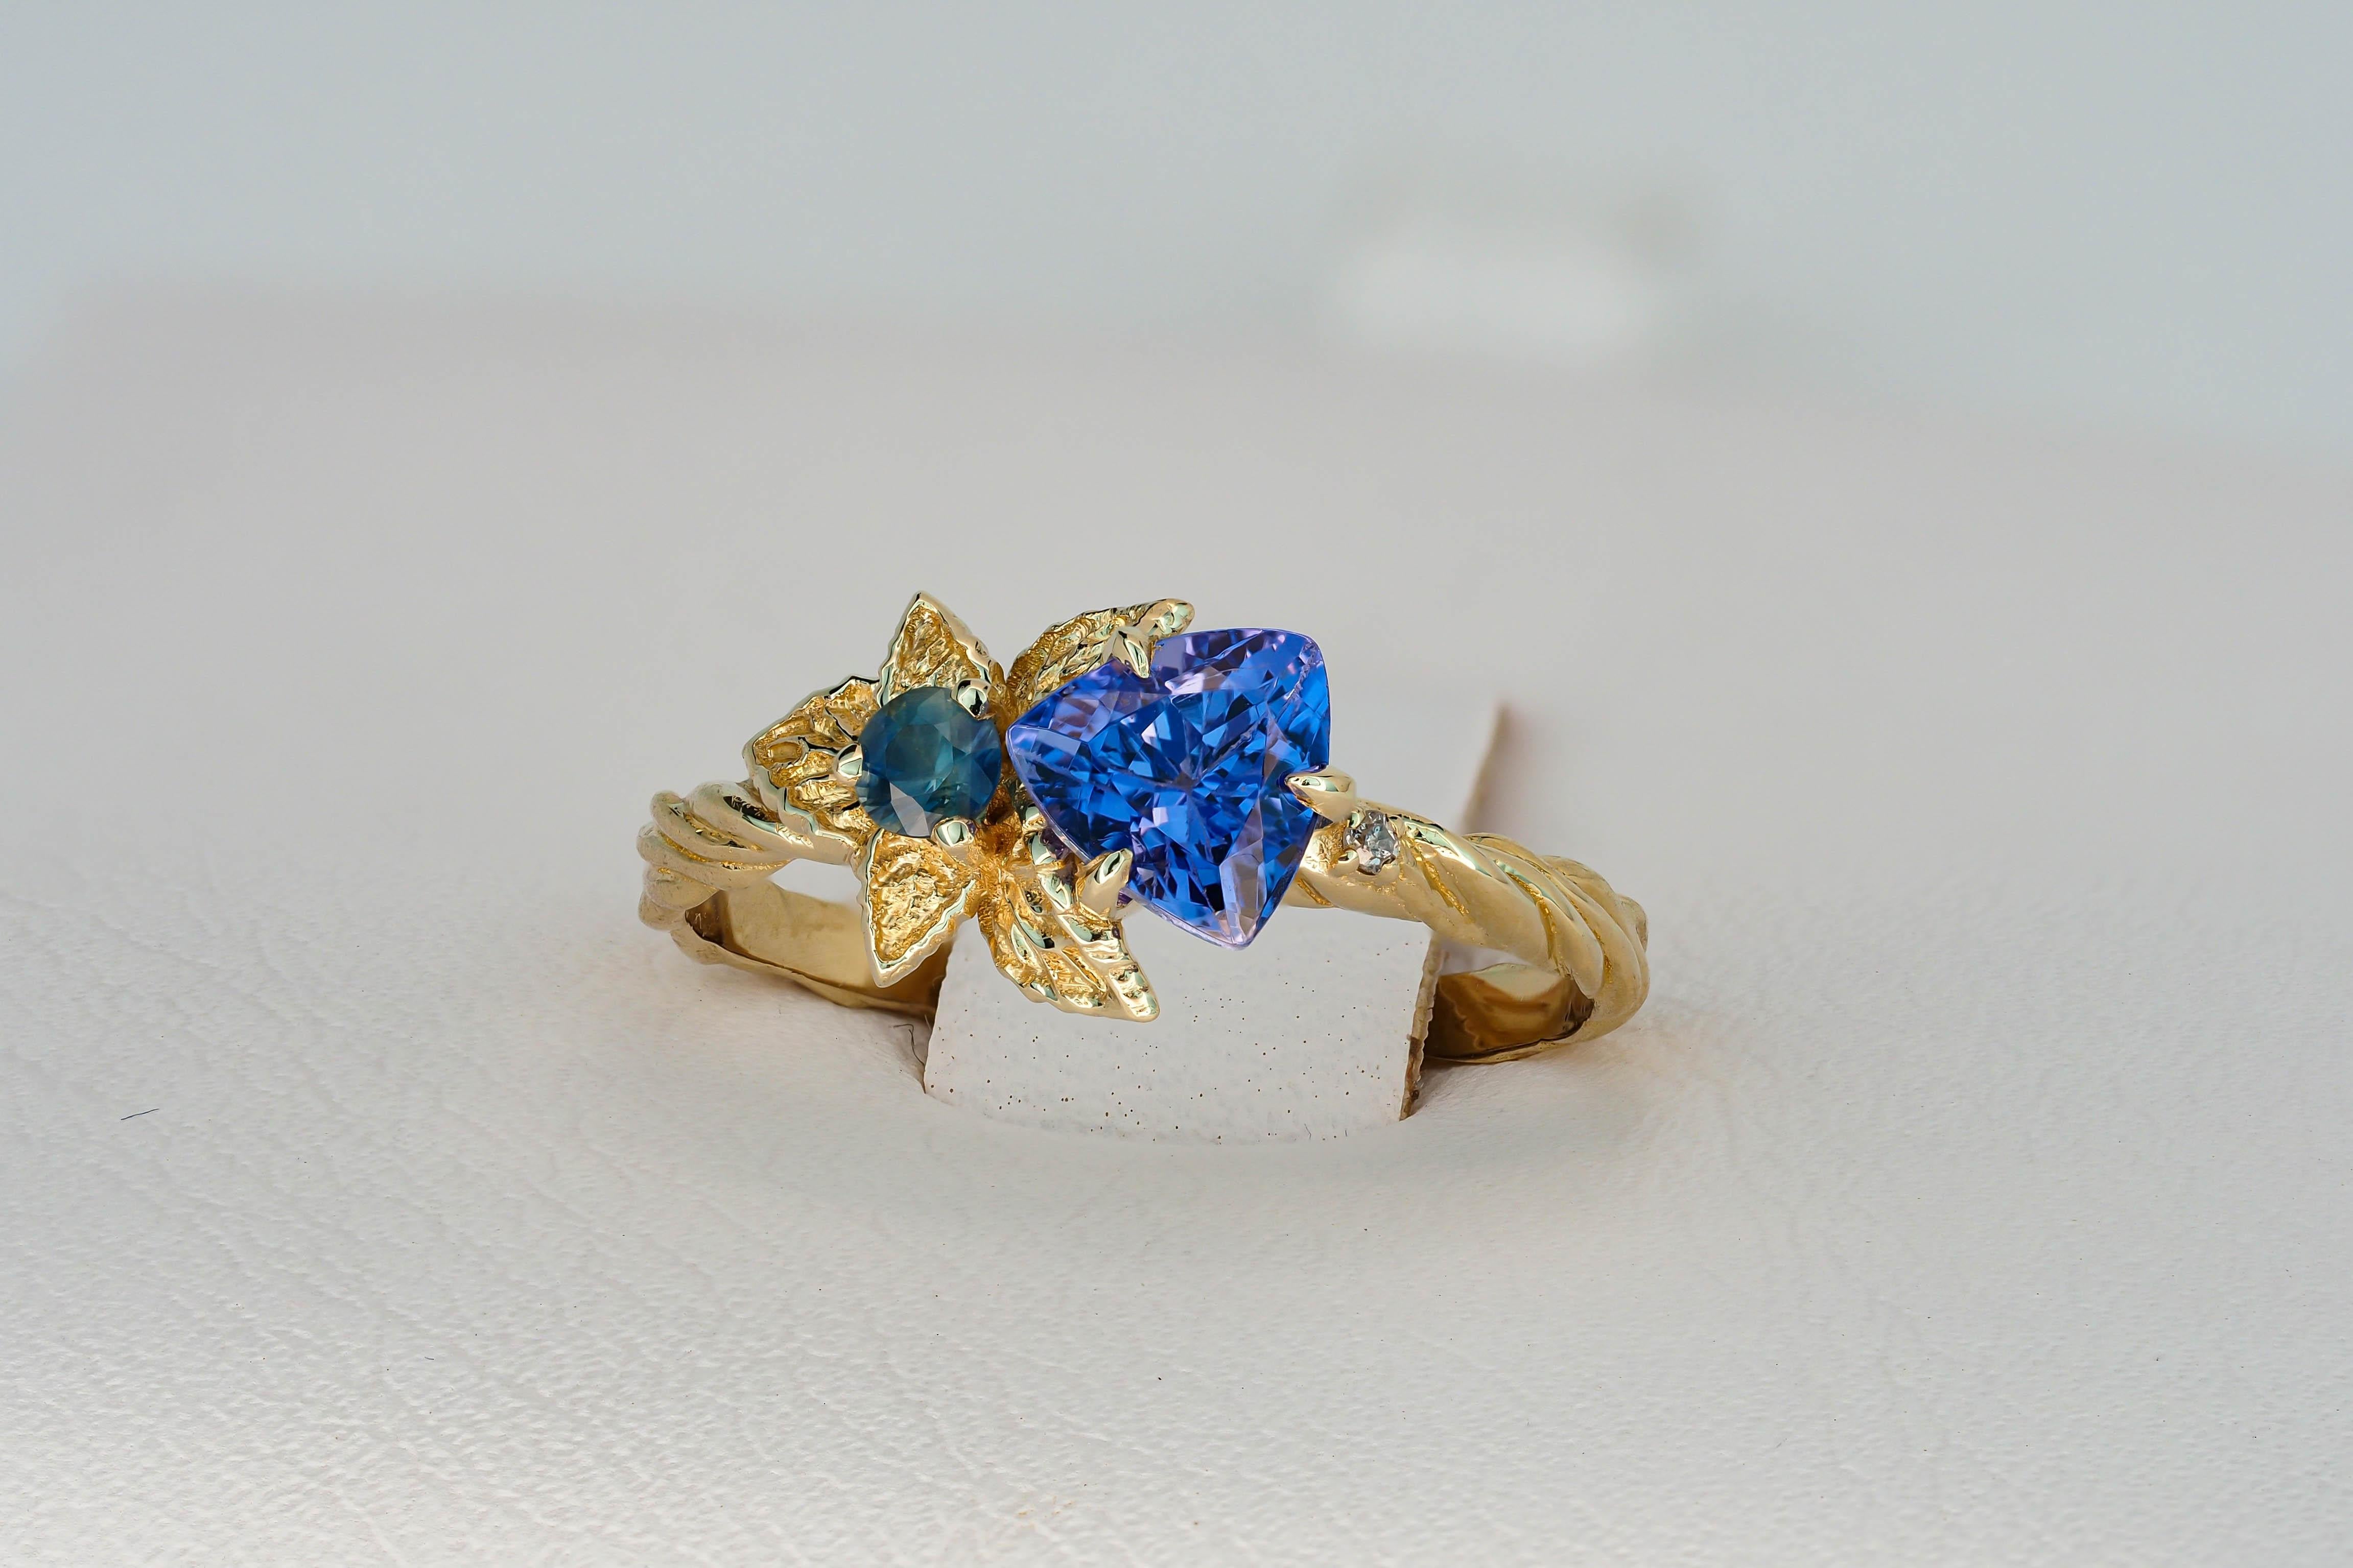 For Sale:  Tanzanite and diamonds 14k gold ring. Flower design ring with tanzanite. 9